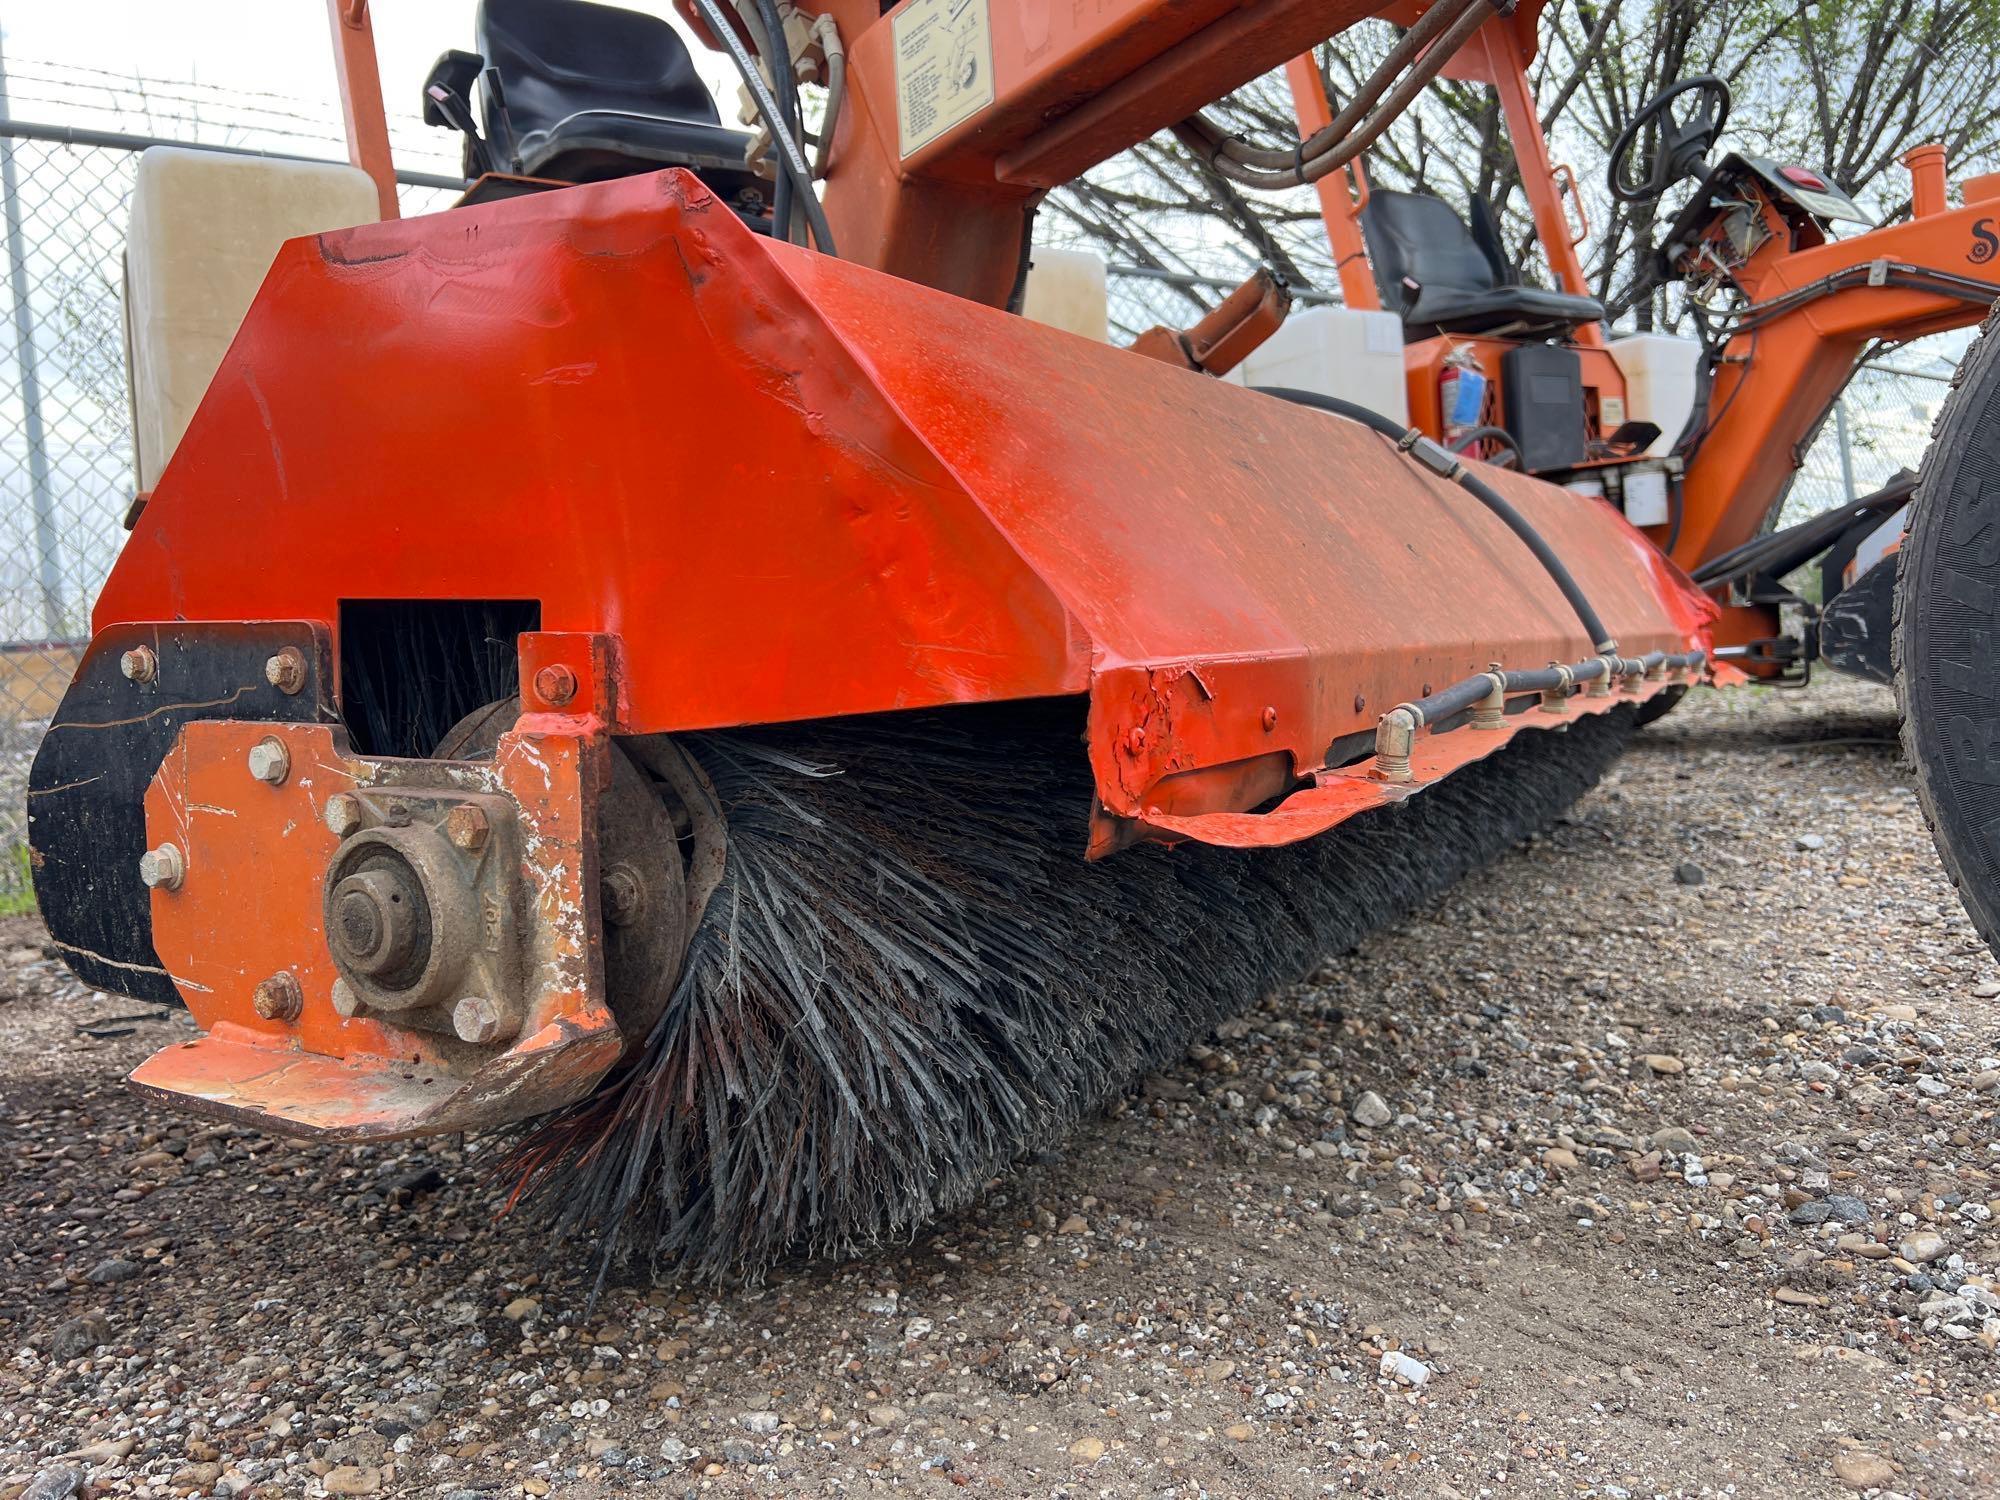 LAYMOR SM300 SWEEPER SN:342021 powered by Kubota 1505 diesel engine, equipped with OROPS, 8ft.